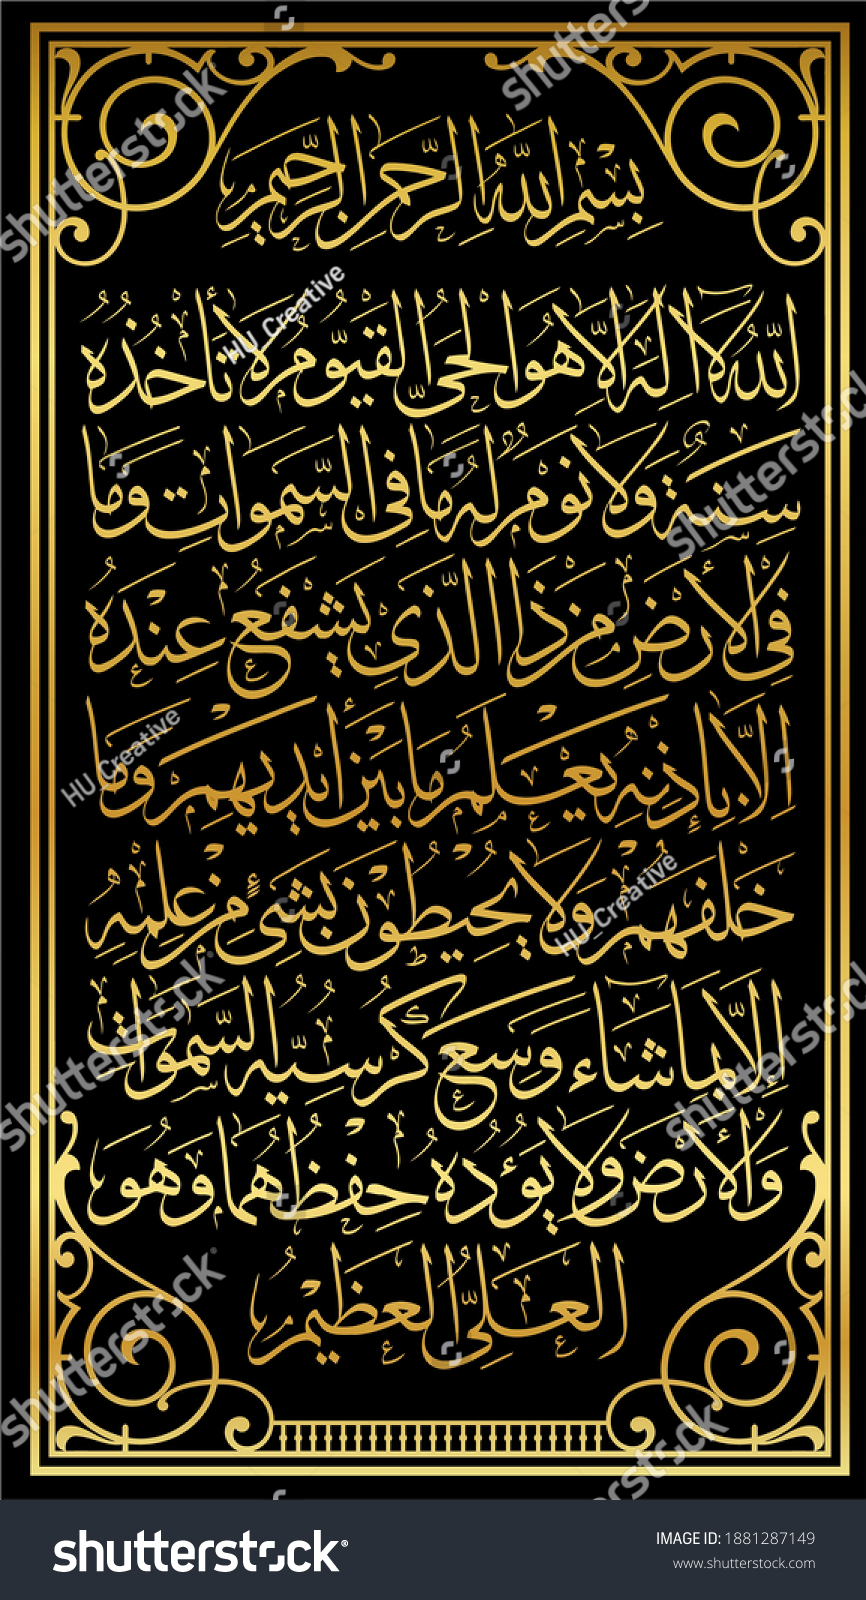 SVG of Arabic Calligraphy Vector from verse 255 from chapter 